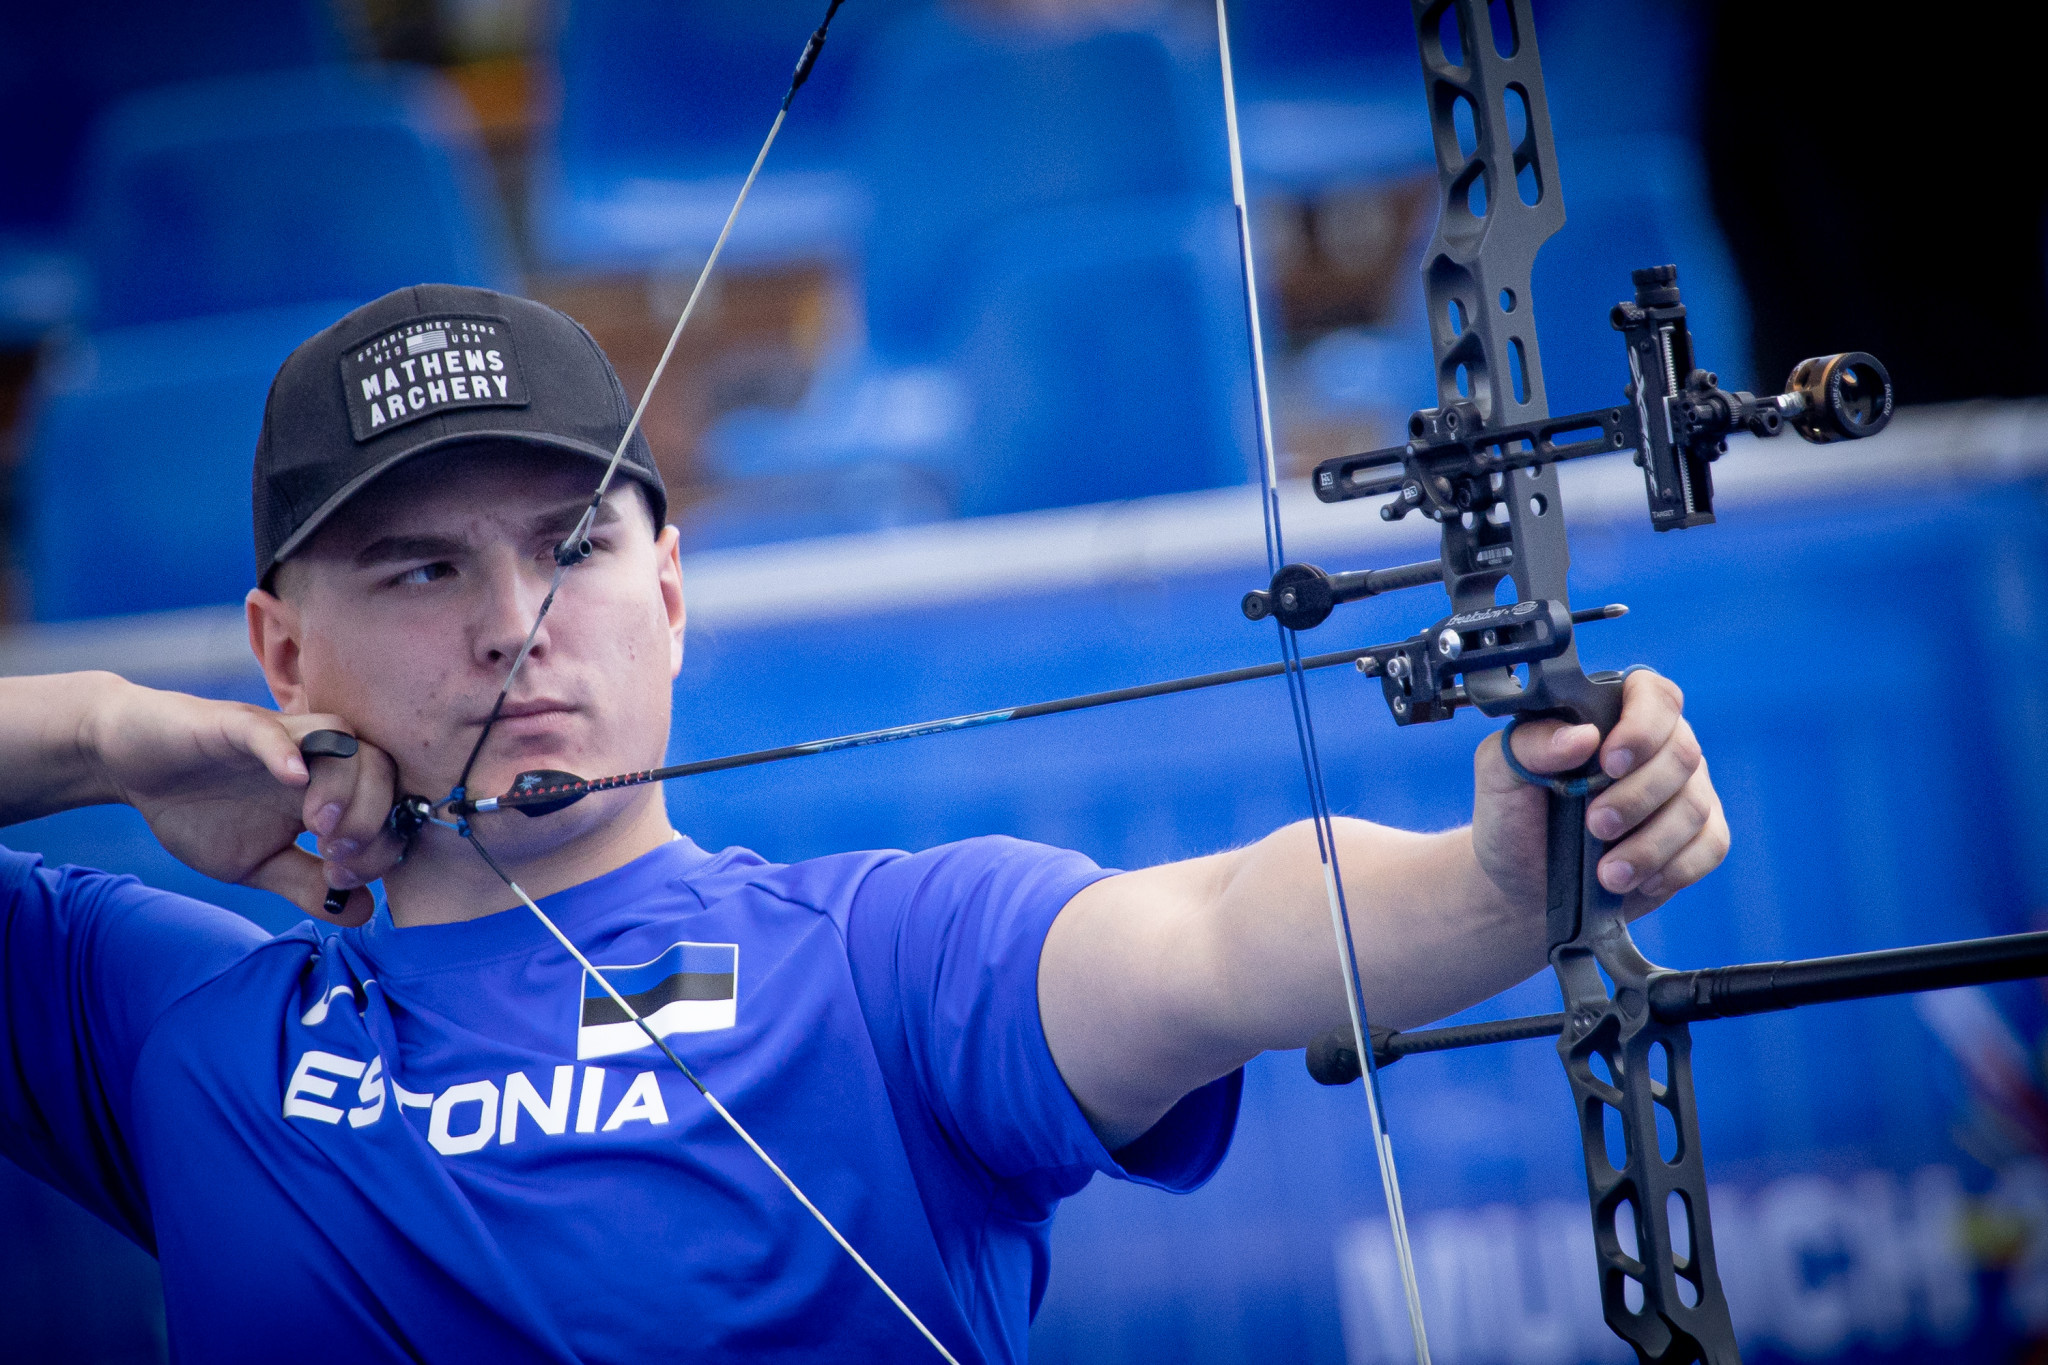 Compound archery could be introduced for the Los Angeles 2028 Olympics ©Getty Images